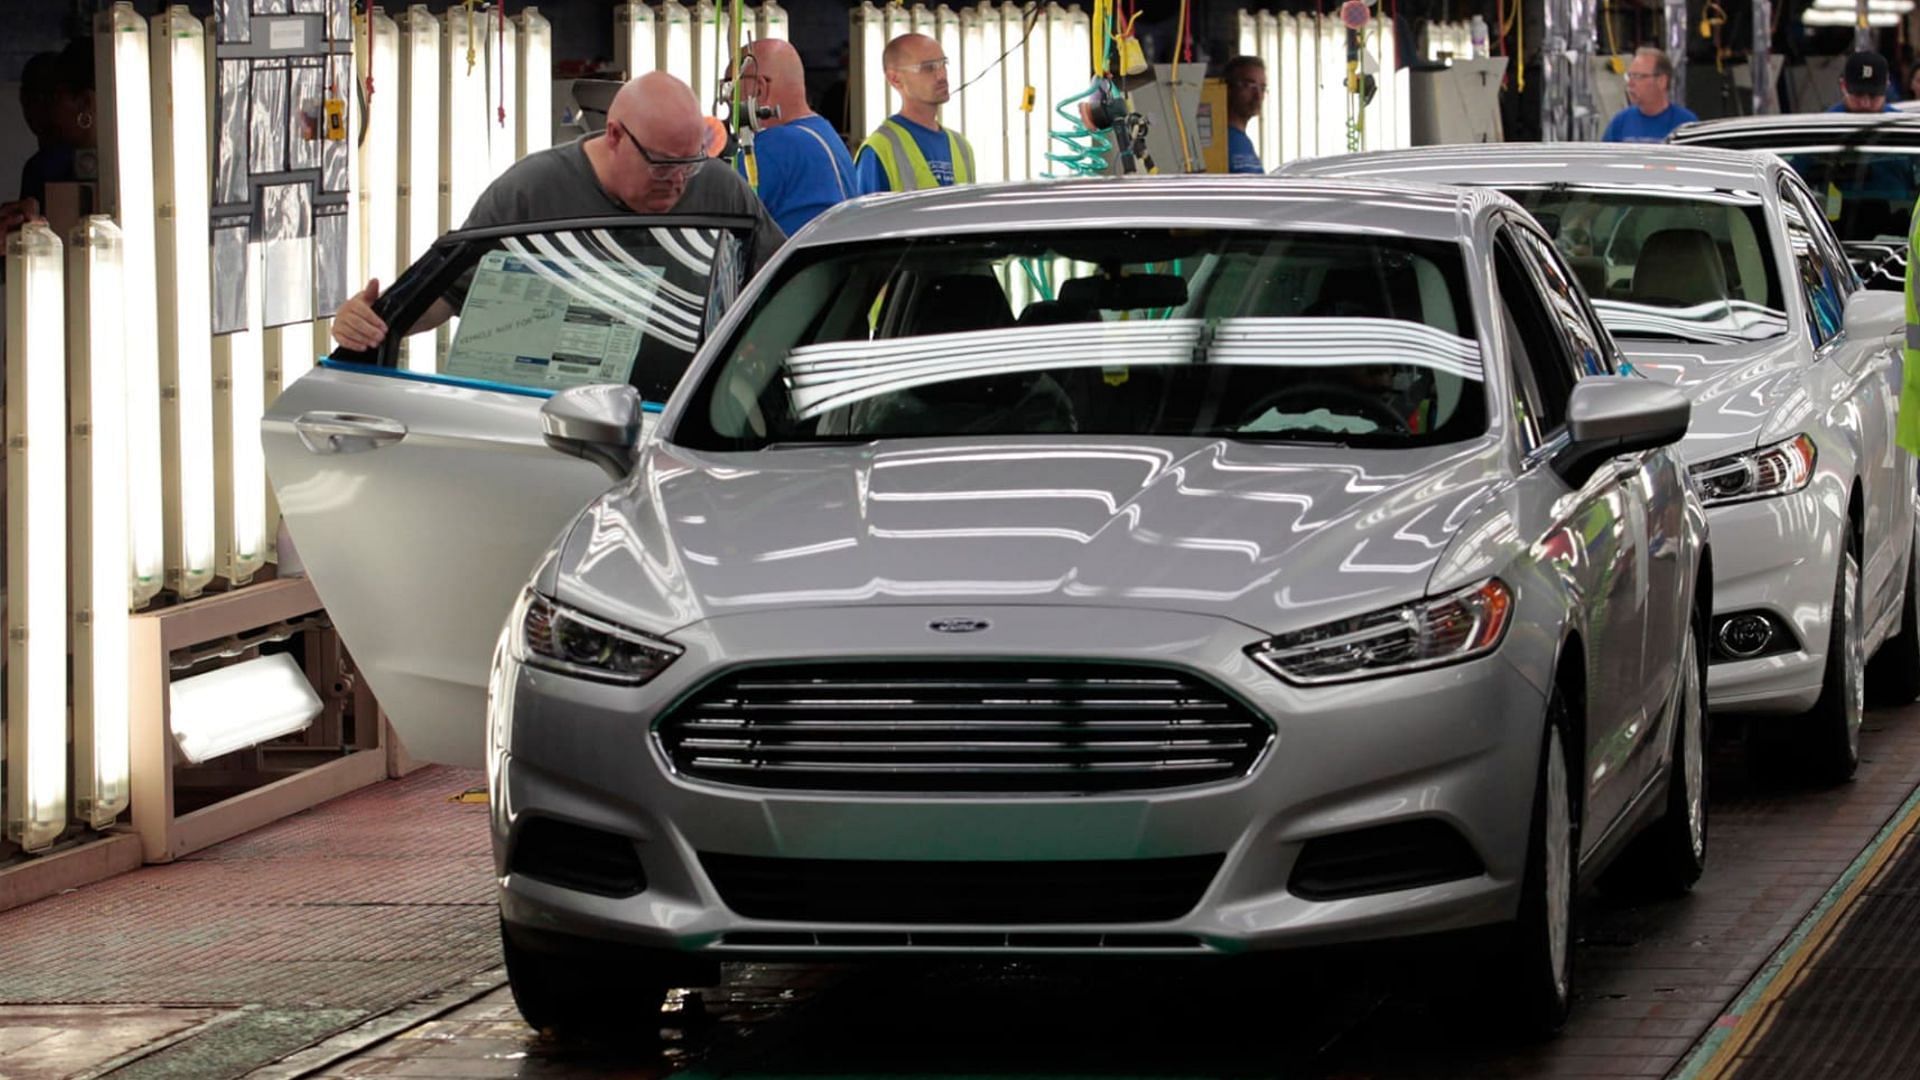 Ford Fusion and Lincoln MKZ sedan owners will be contacted by the company about the recall starting April 17 (Image via Jeff Kowalsky/Bloomberg/Getty Images)